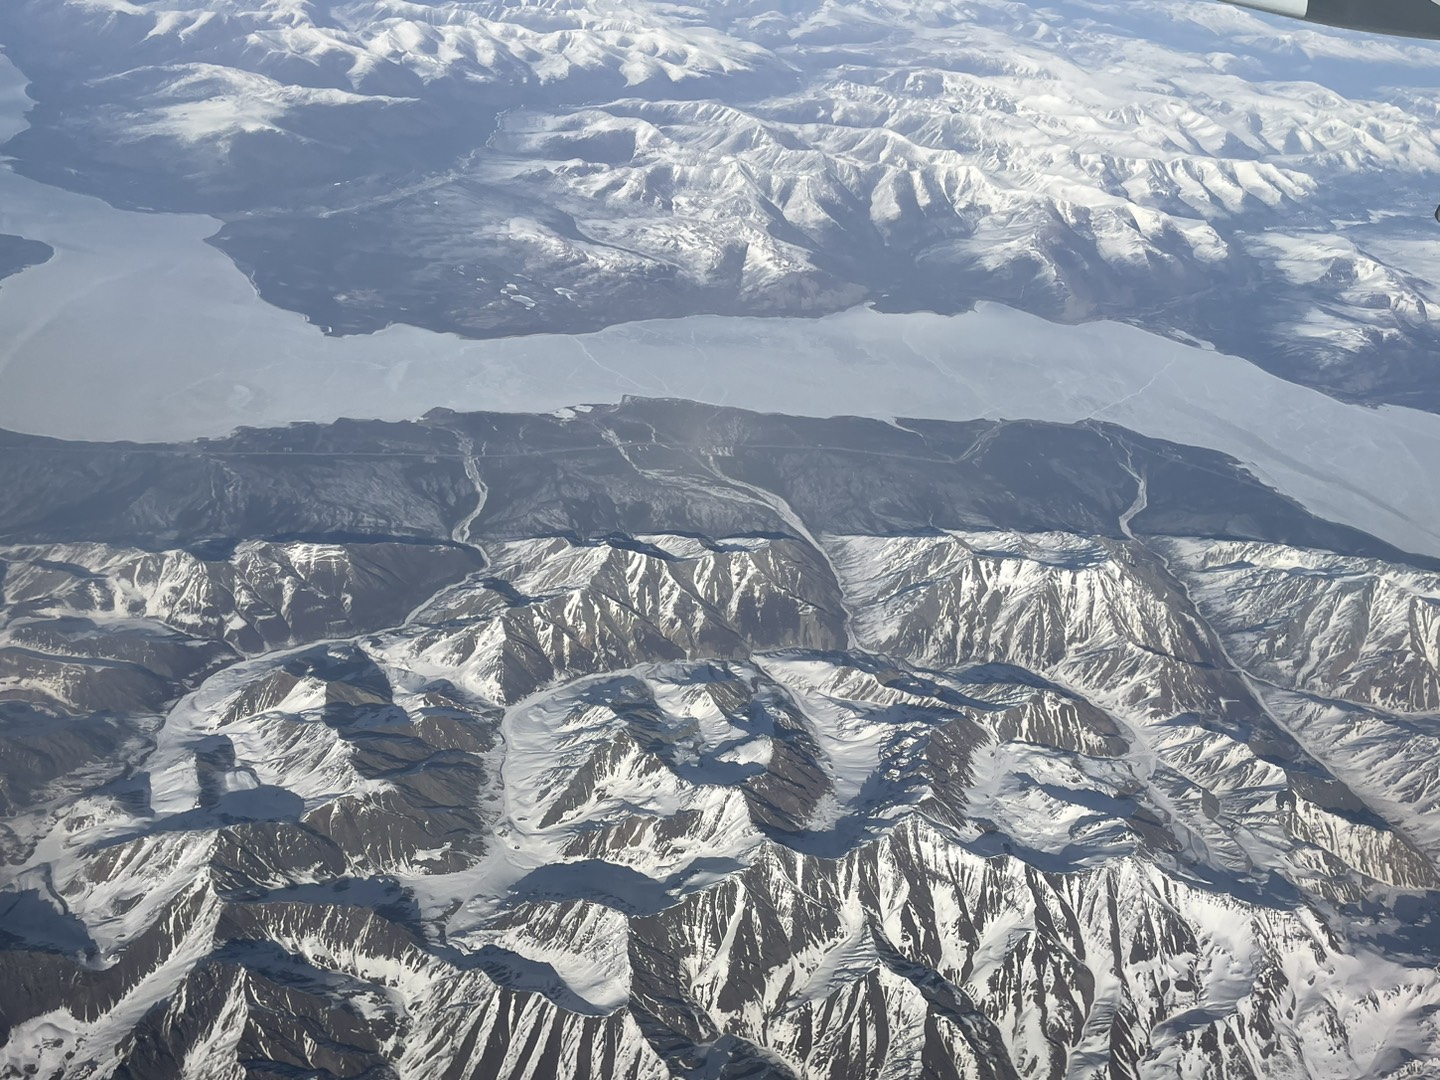 A photo showing a frozen river running between snow-covered mountain ranges taken from an airplane. 